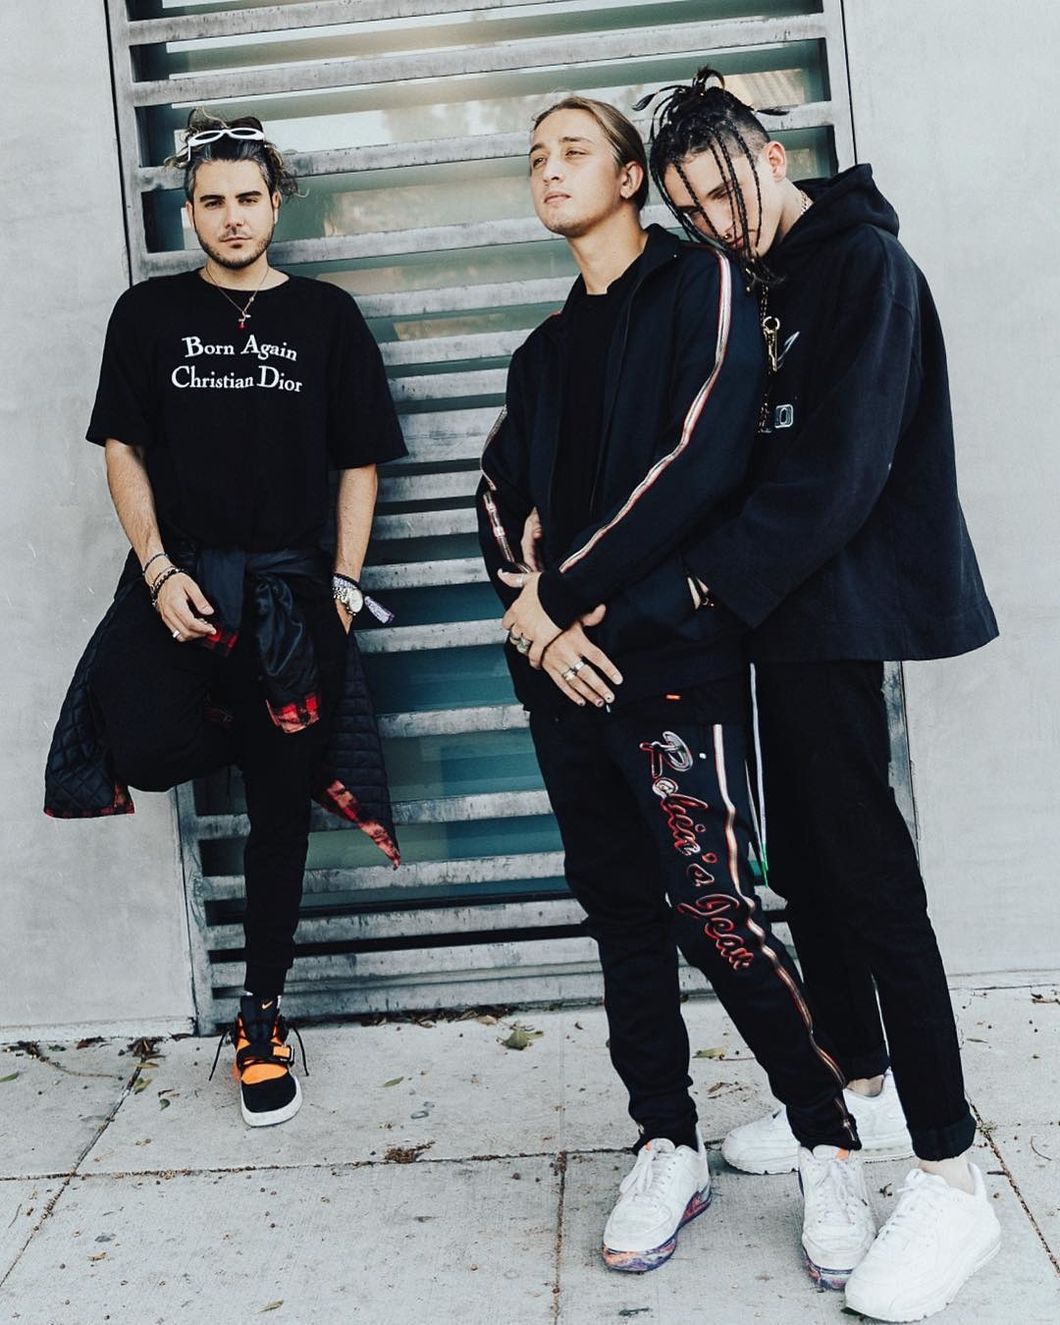 10 Songs By Chase Atlantic That You NEED To Listen To, Like Right Now